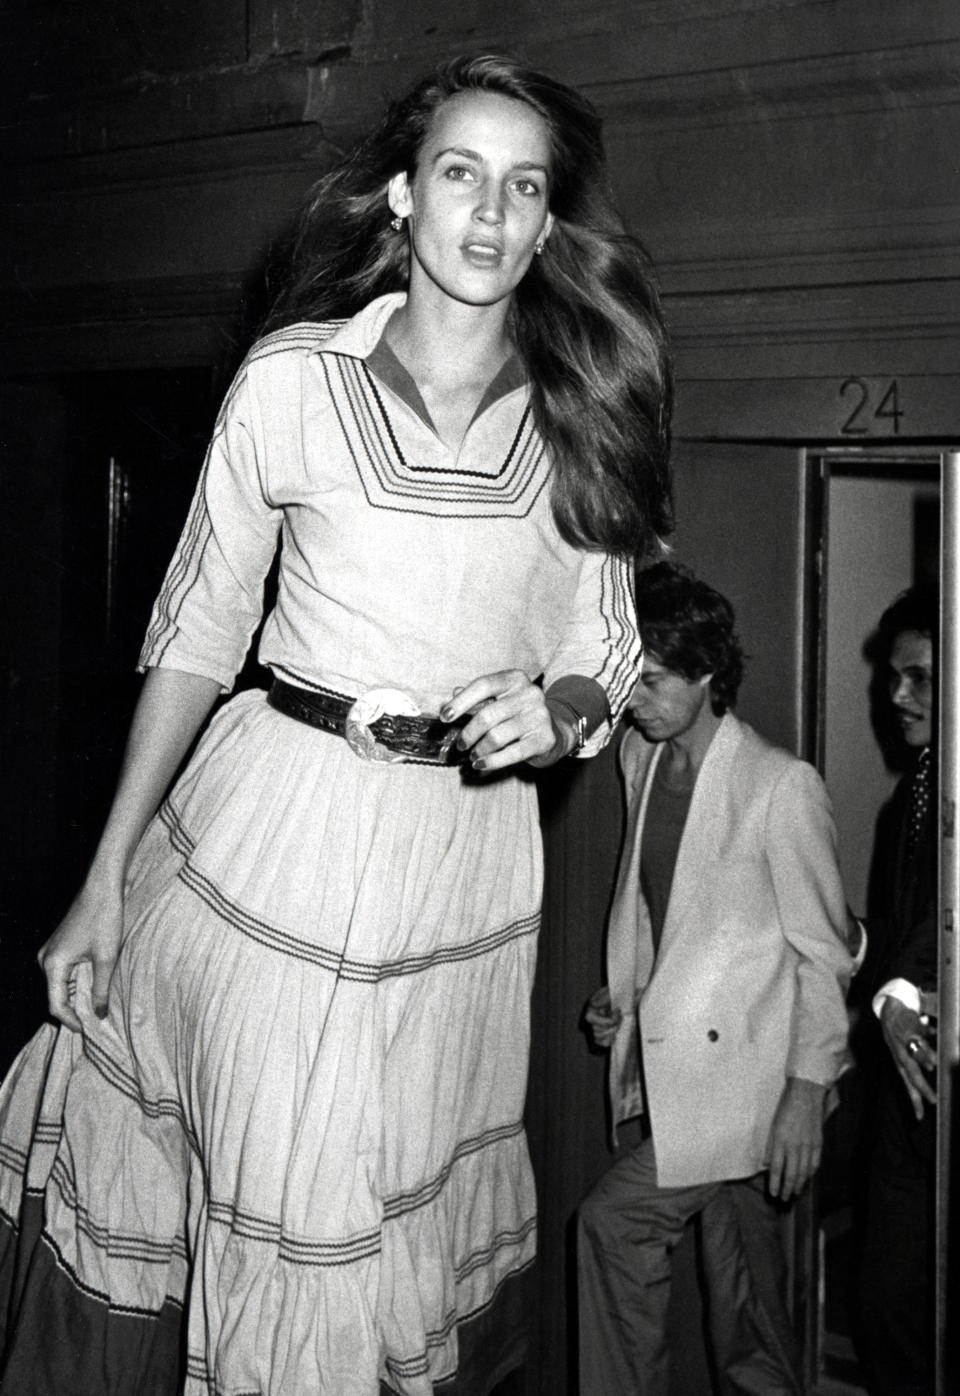 70s trends jerry hall